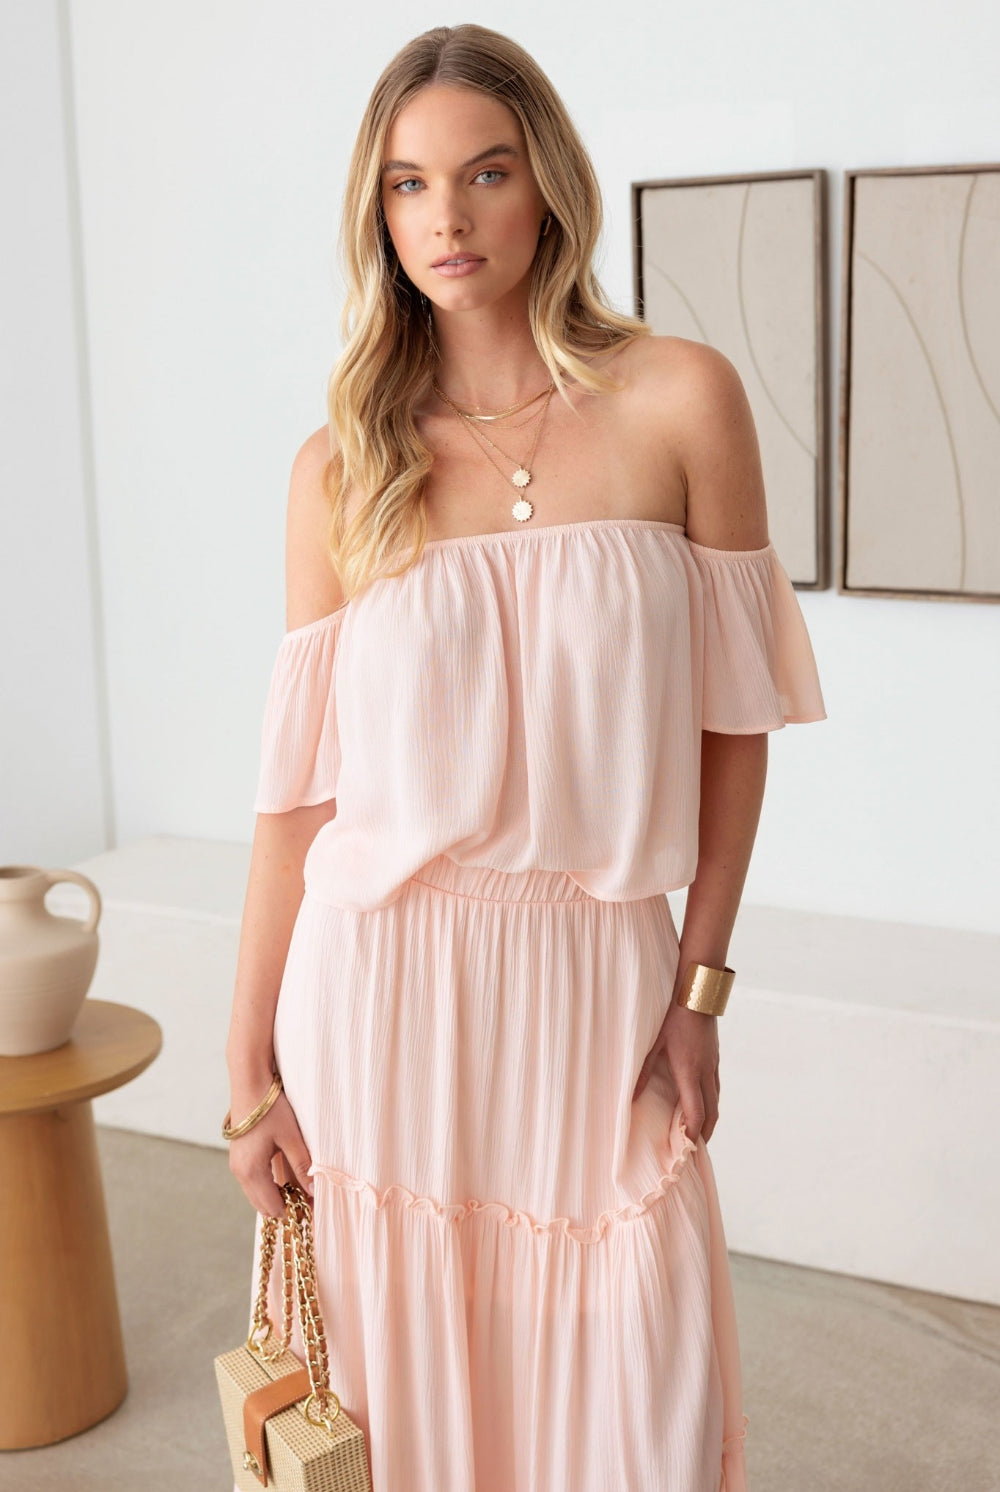 Elegant blush tiered dress with an off shoulder design and frill detailing, perfect for any occasion.